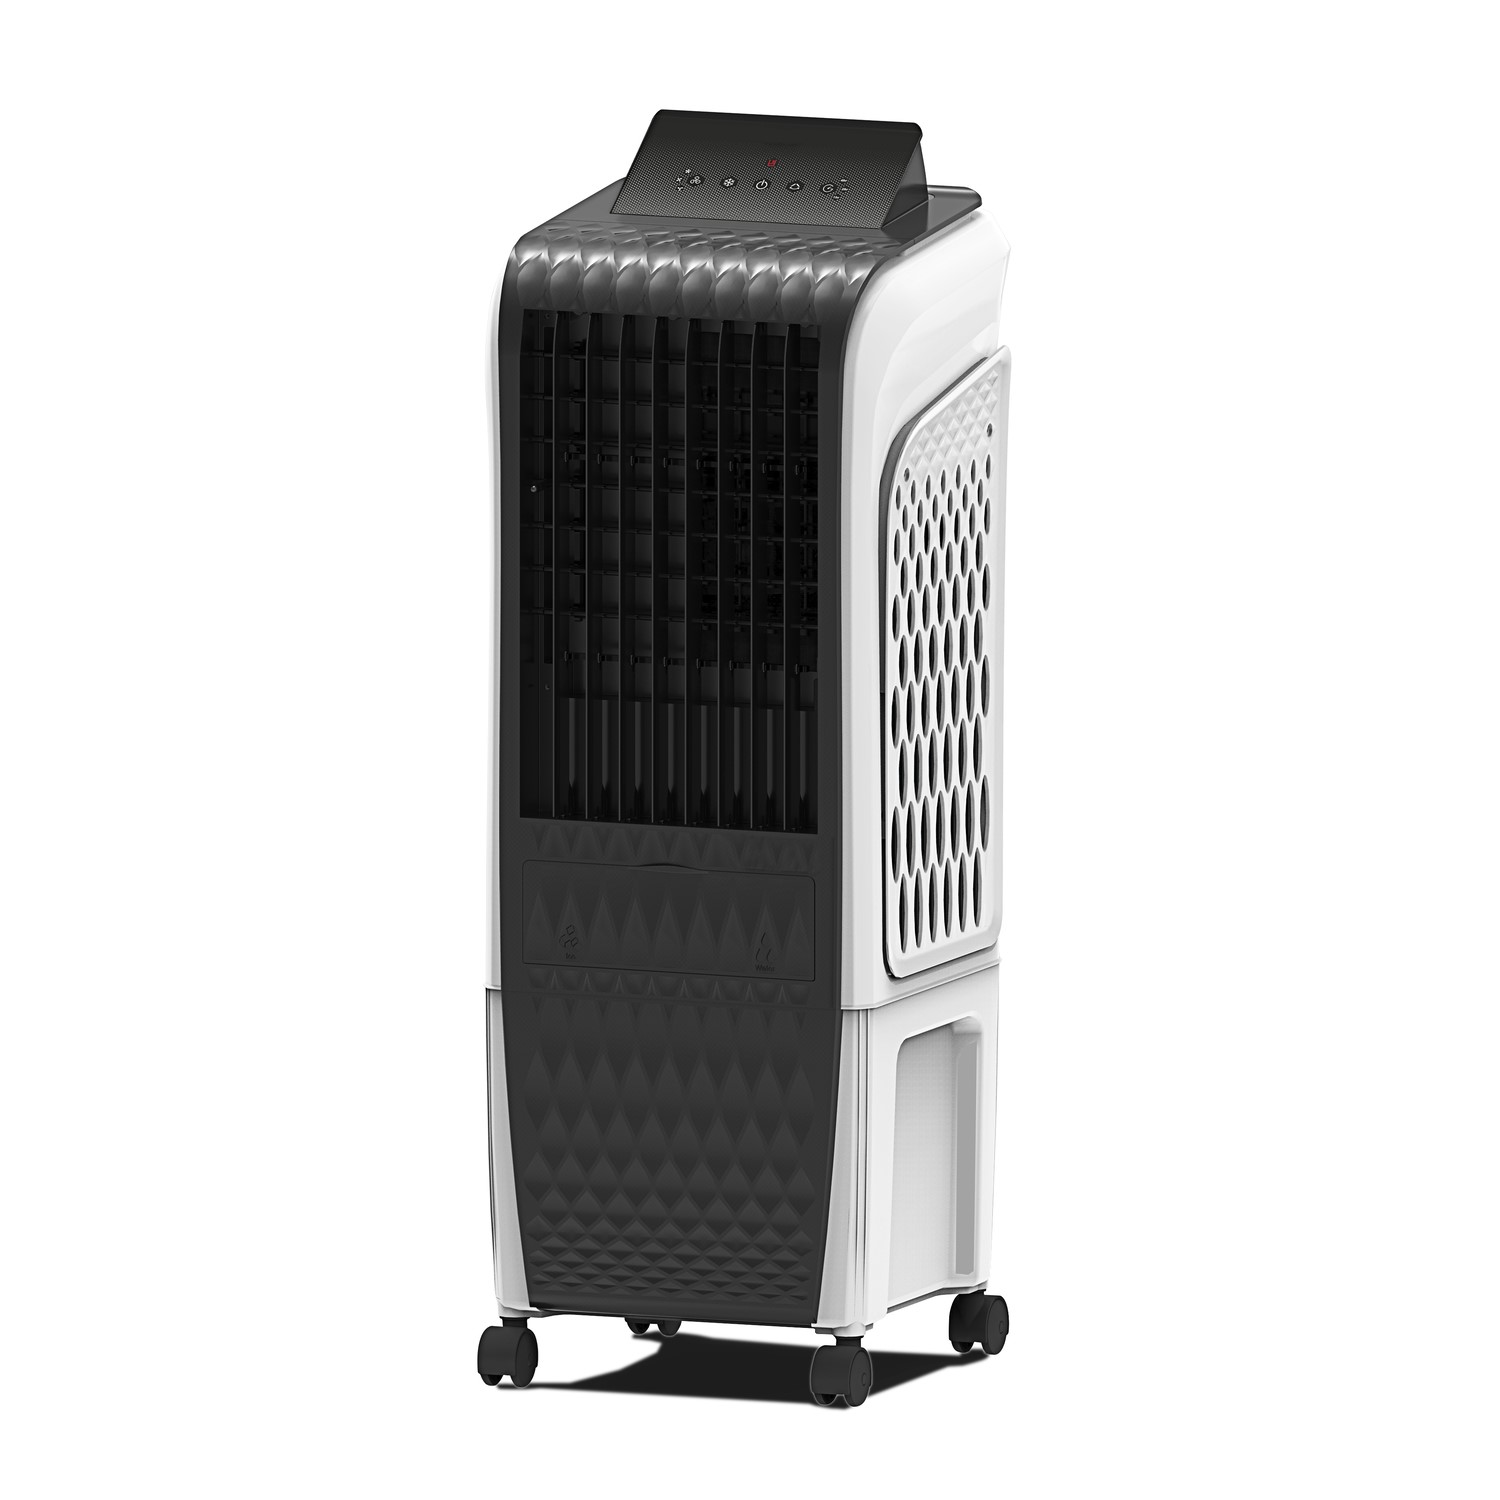 Refurbished electriQ 16L Portable Evaporative Air Cooler Air Purifier with anti-Bacterial PM2.5 filt